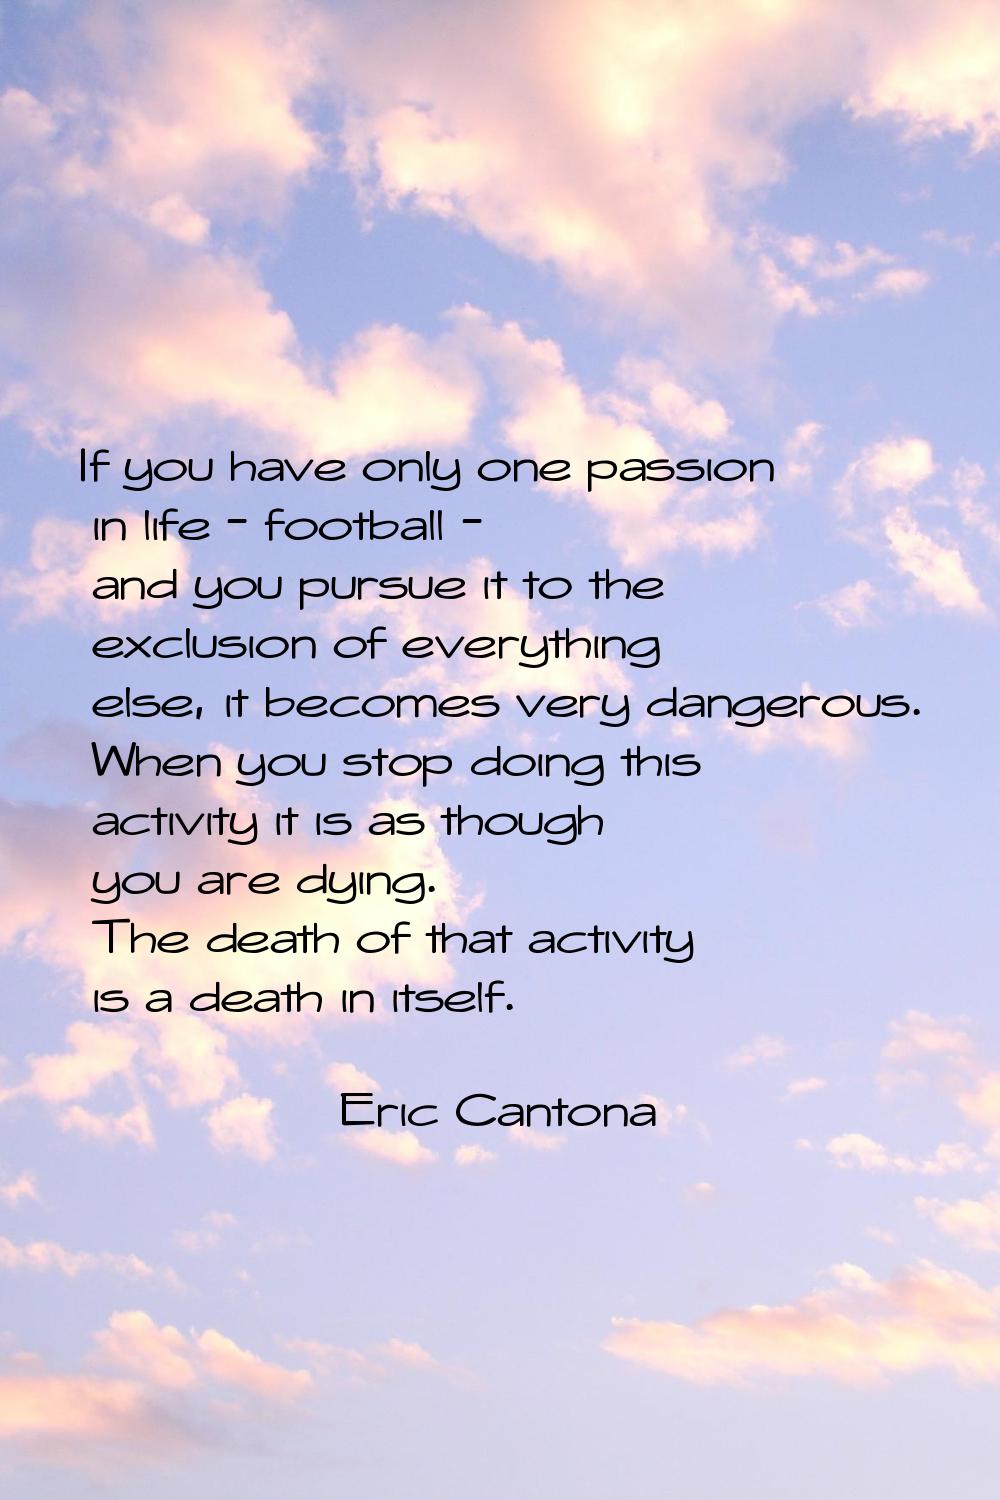 If you have only one passion in life - football - and you pursue it to the exclusion of everything 